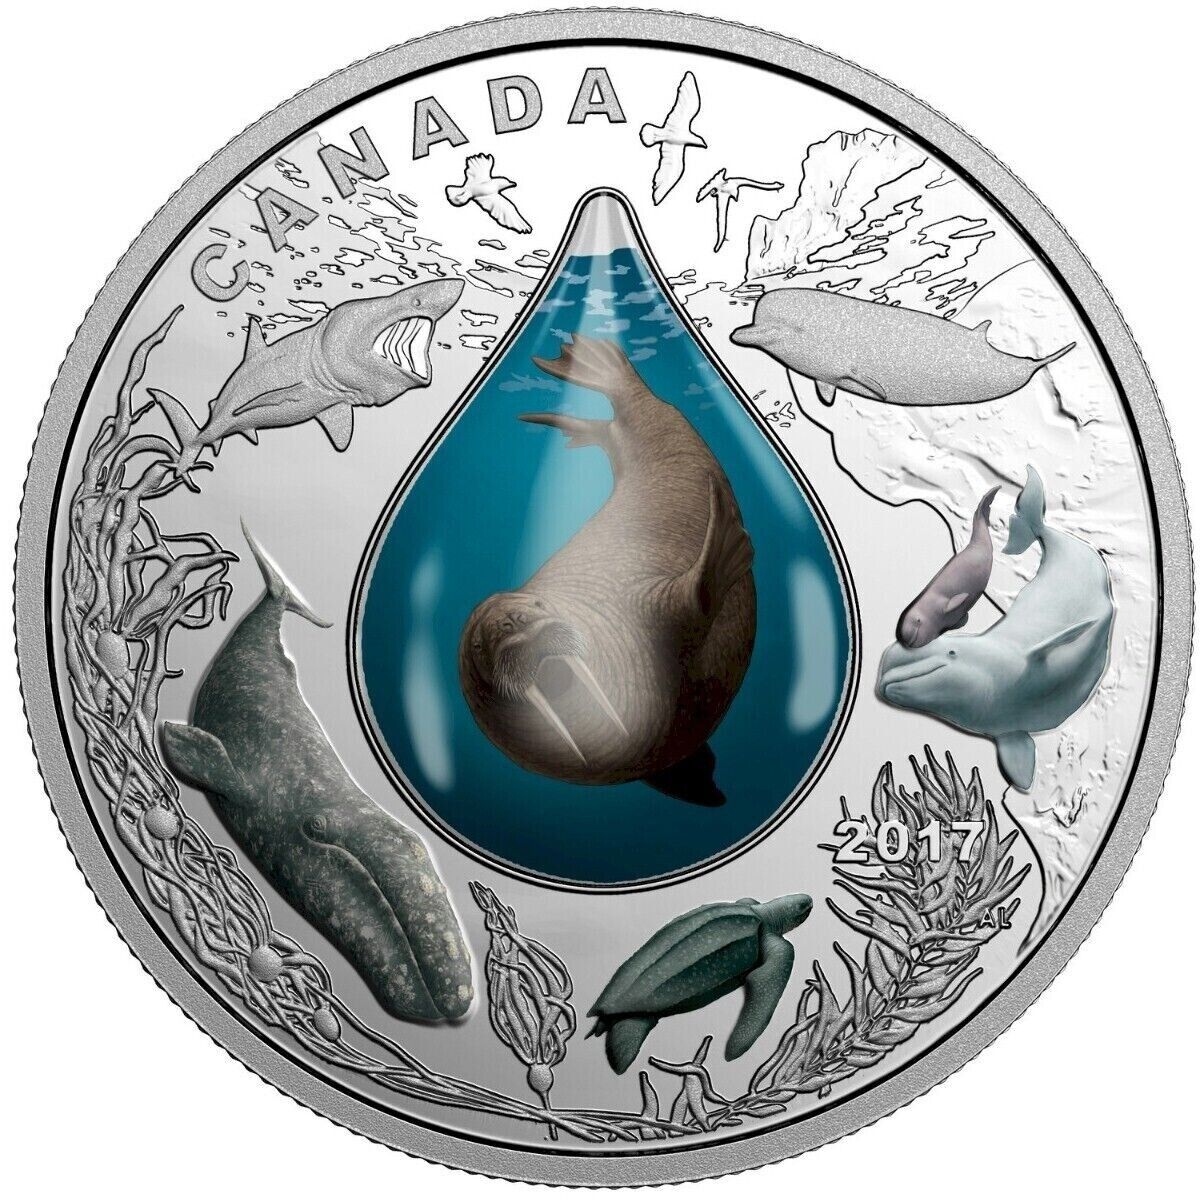 1 oz Silver Coin 2017 $20 Canadian Underwater Life 3D Walrus Water droplet-classypw.com-1